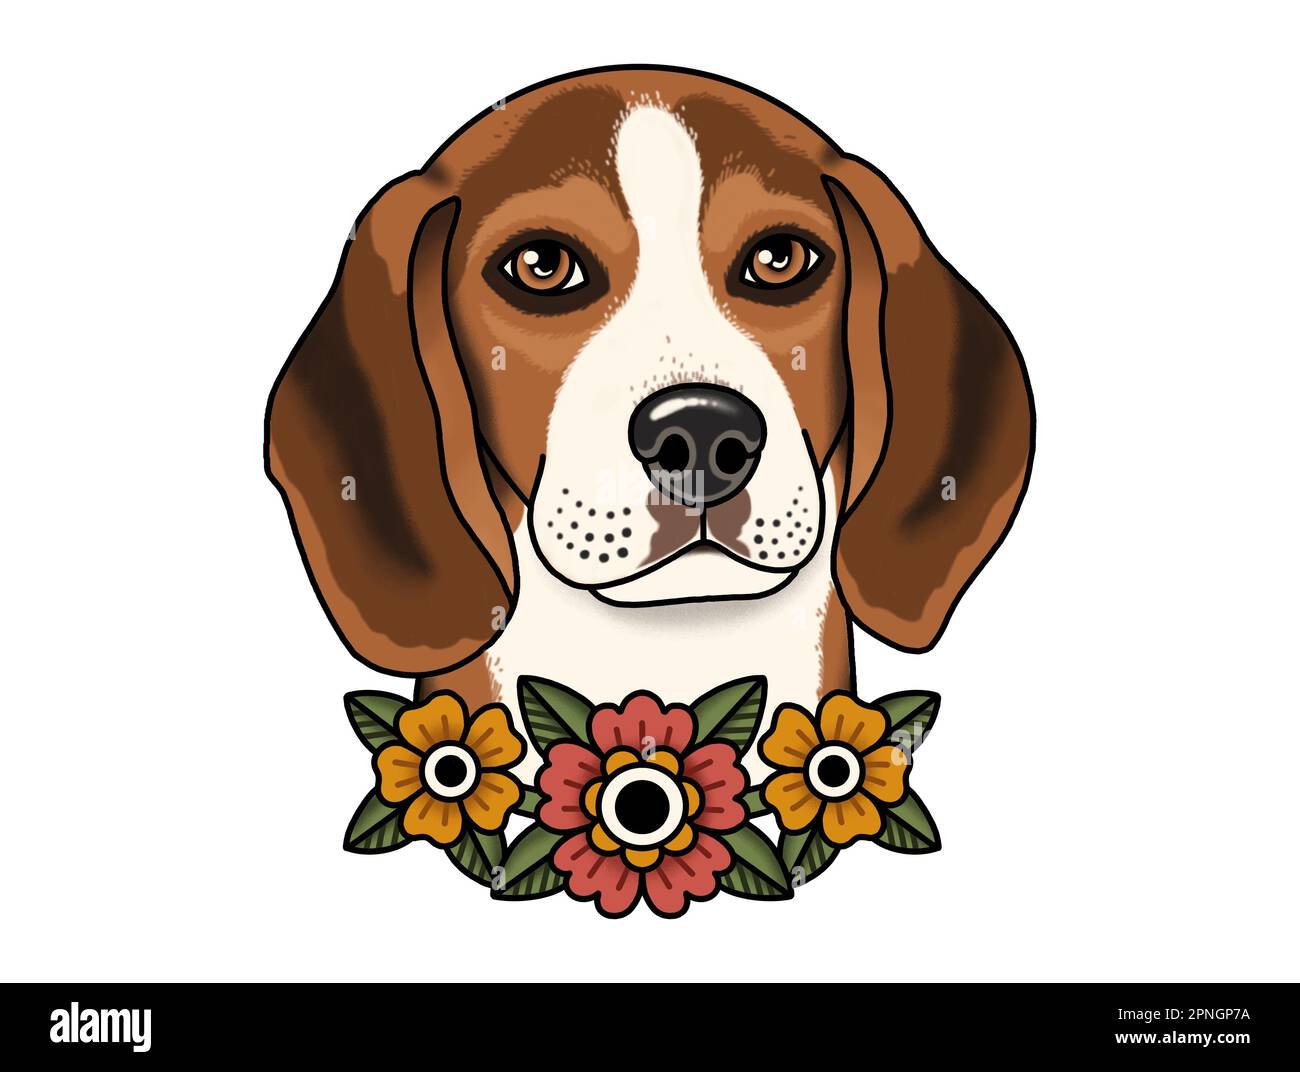 Dog Portrait Beagle with flowers  full color Drawing inspired by the tattoo art style Stock Photo